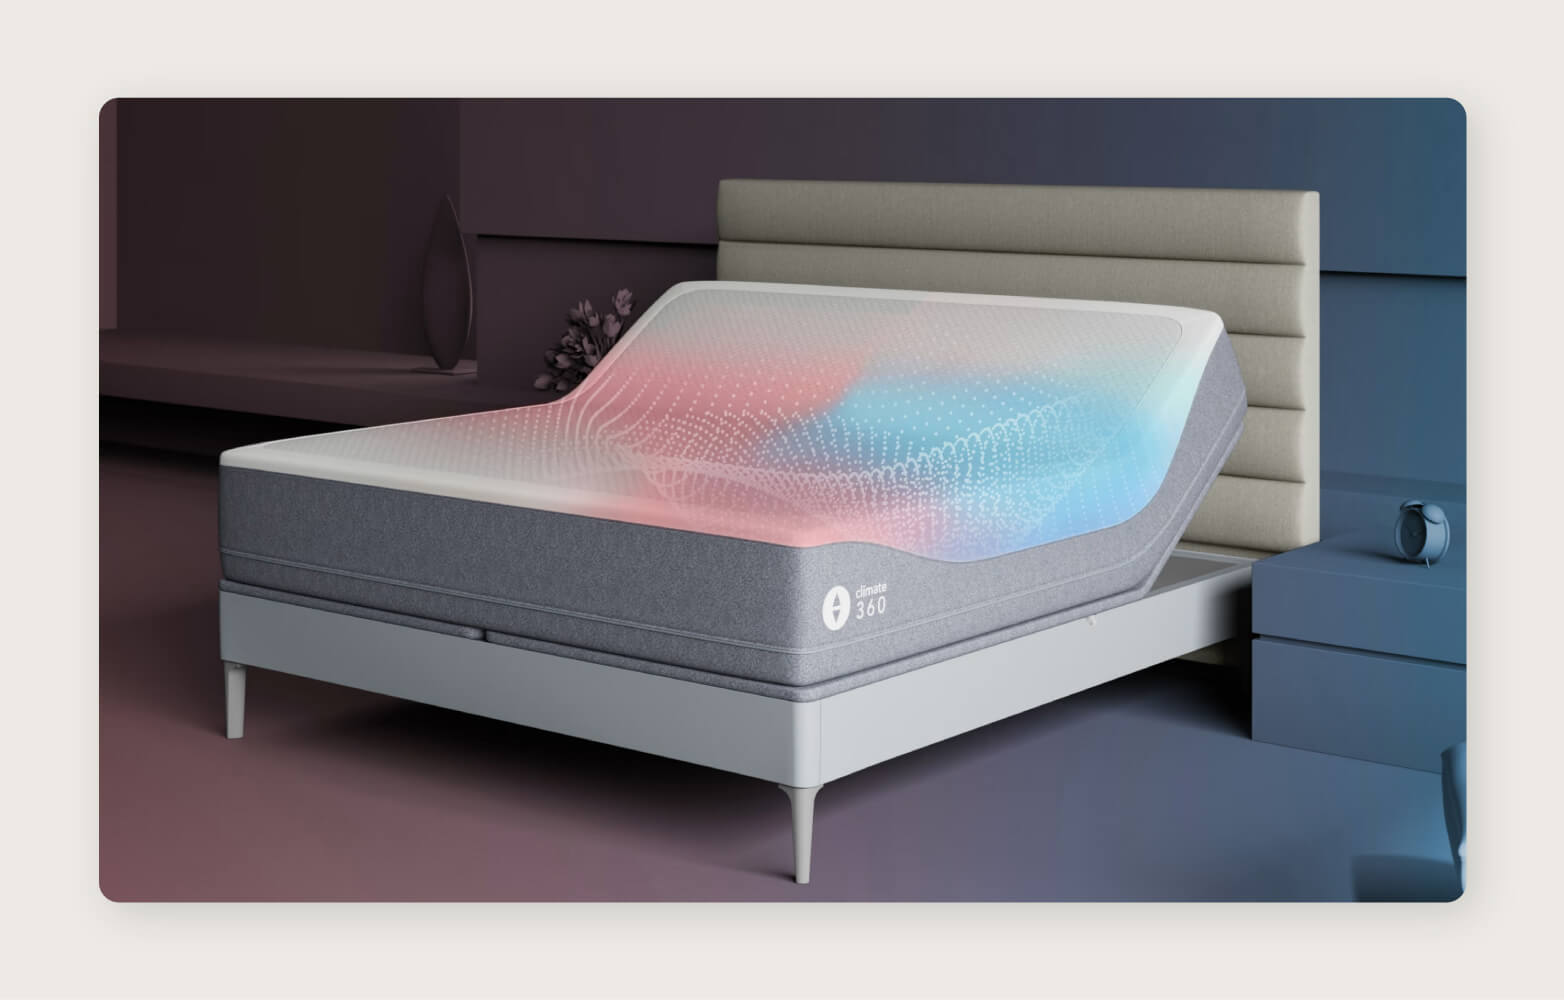 An inclined Sleep Number Climate360 Smart Bed in a plain gray room. 